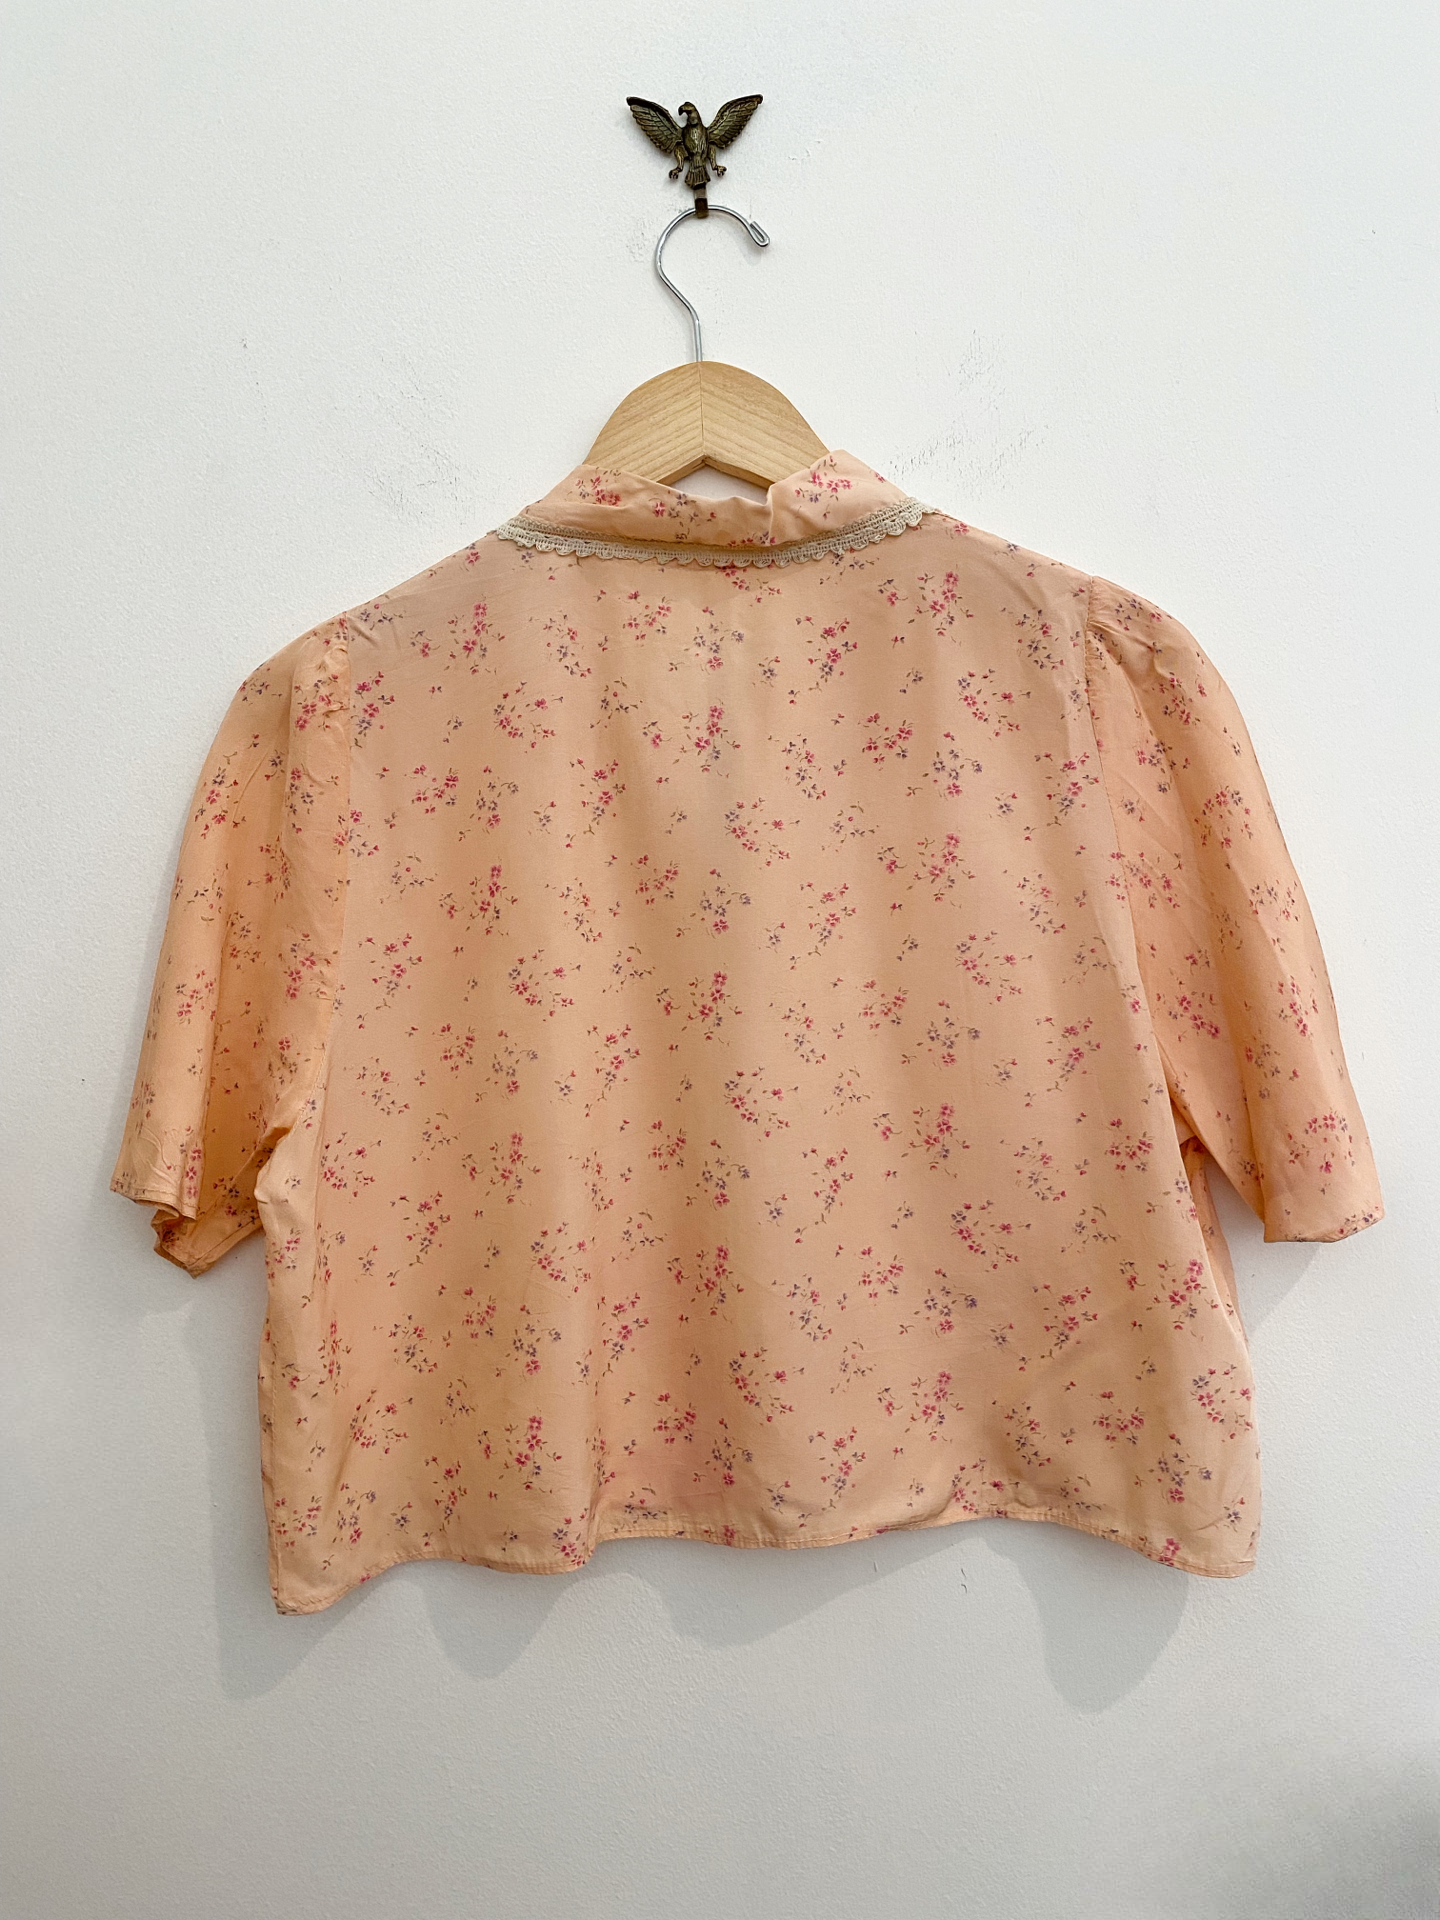 1930s/40s Pink Floral Rayon Bed Jacket Blouse- S/M